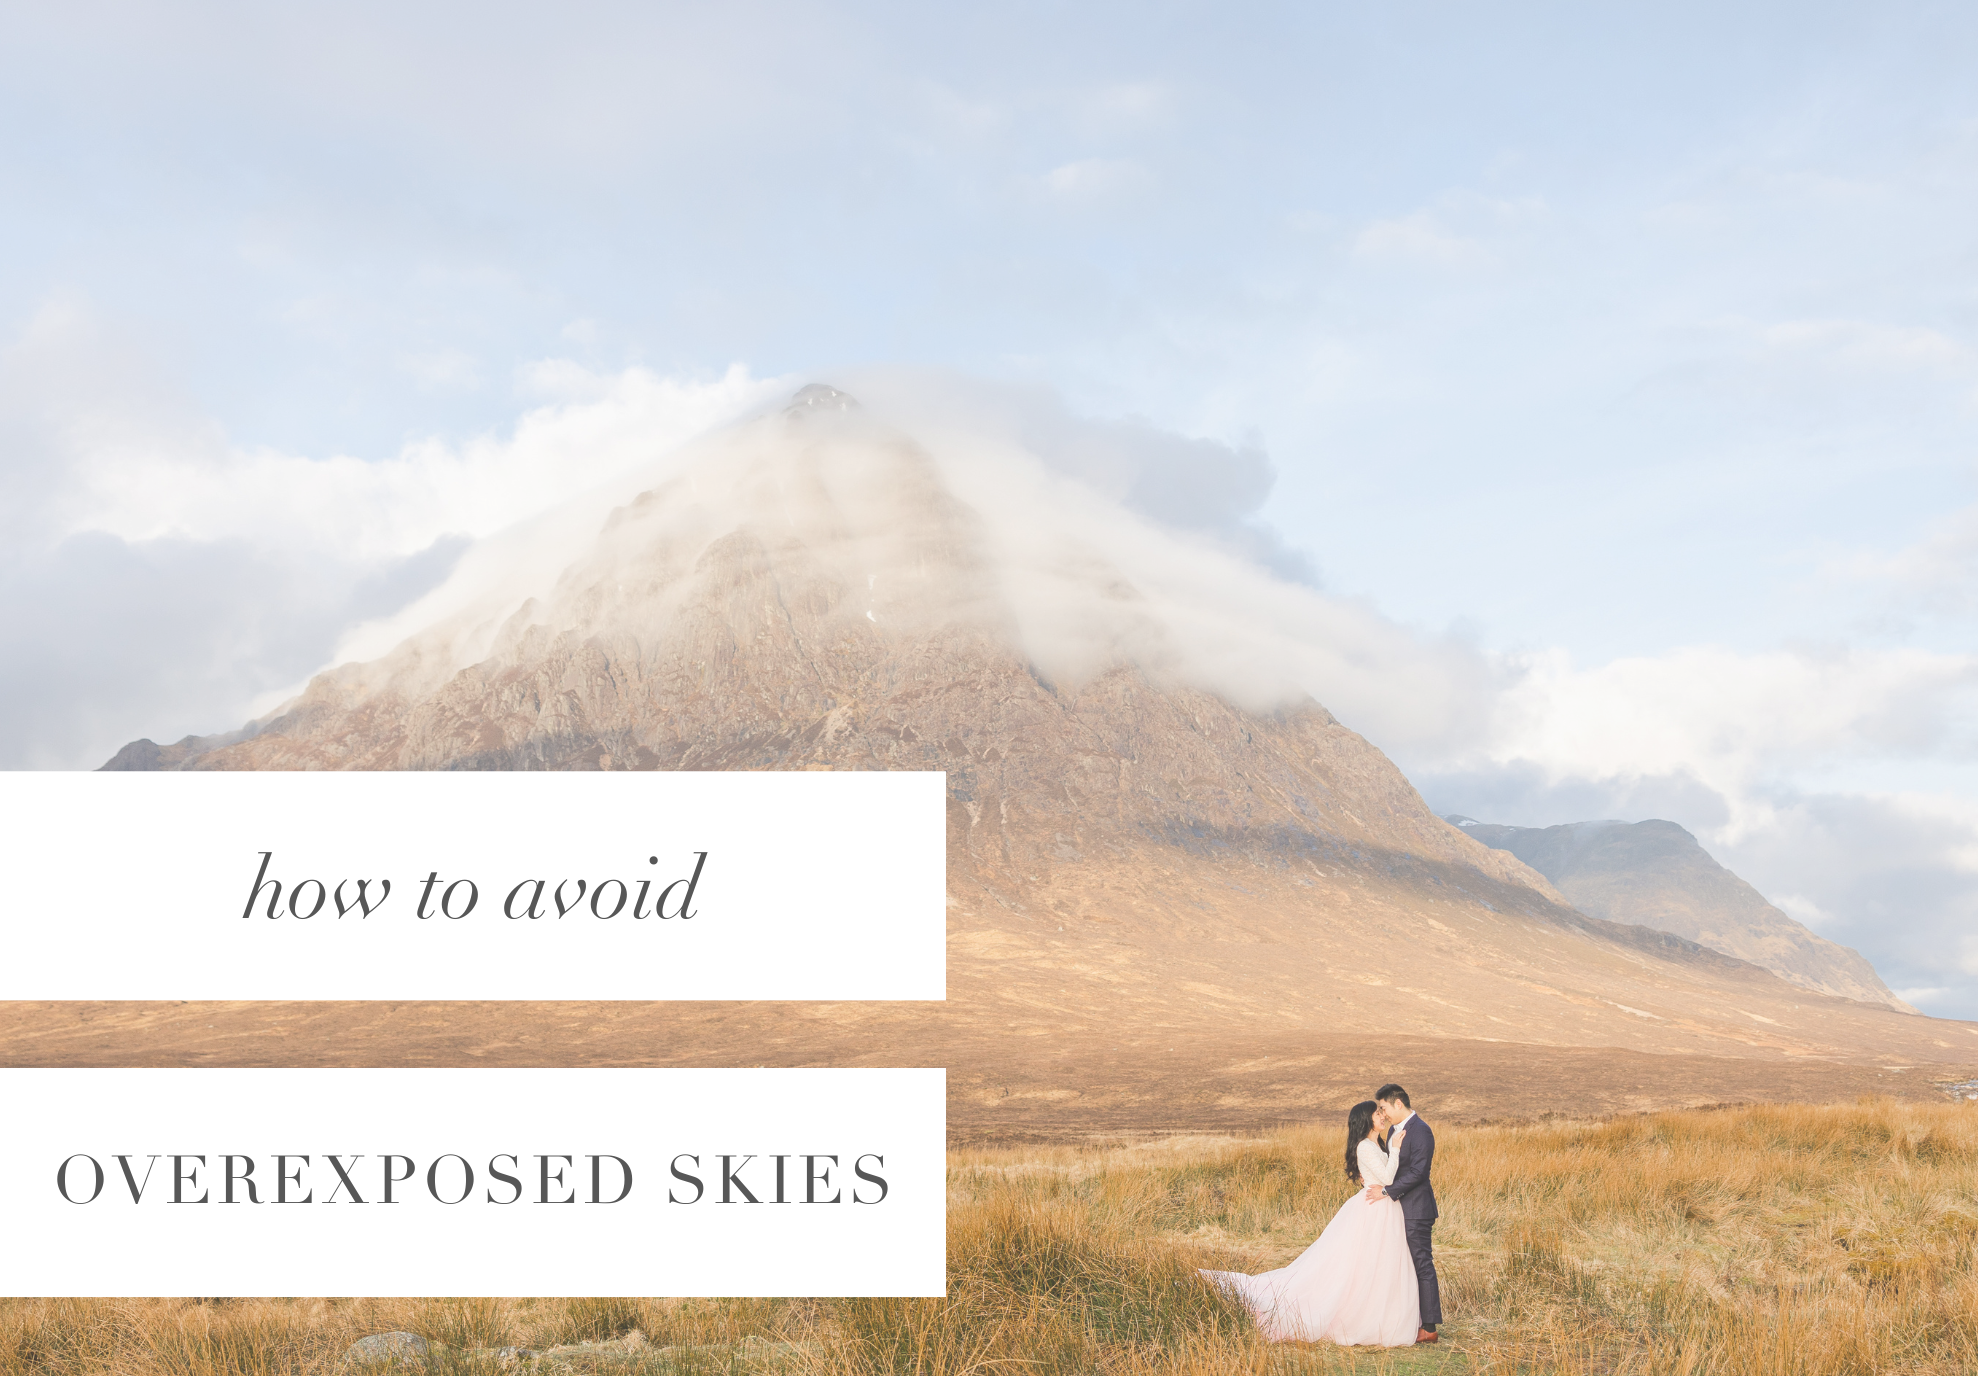 HOW TO AVOID OVEREXPOSED SKIES